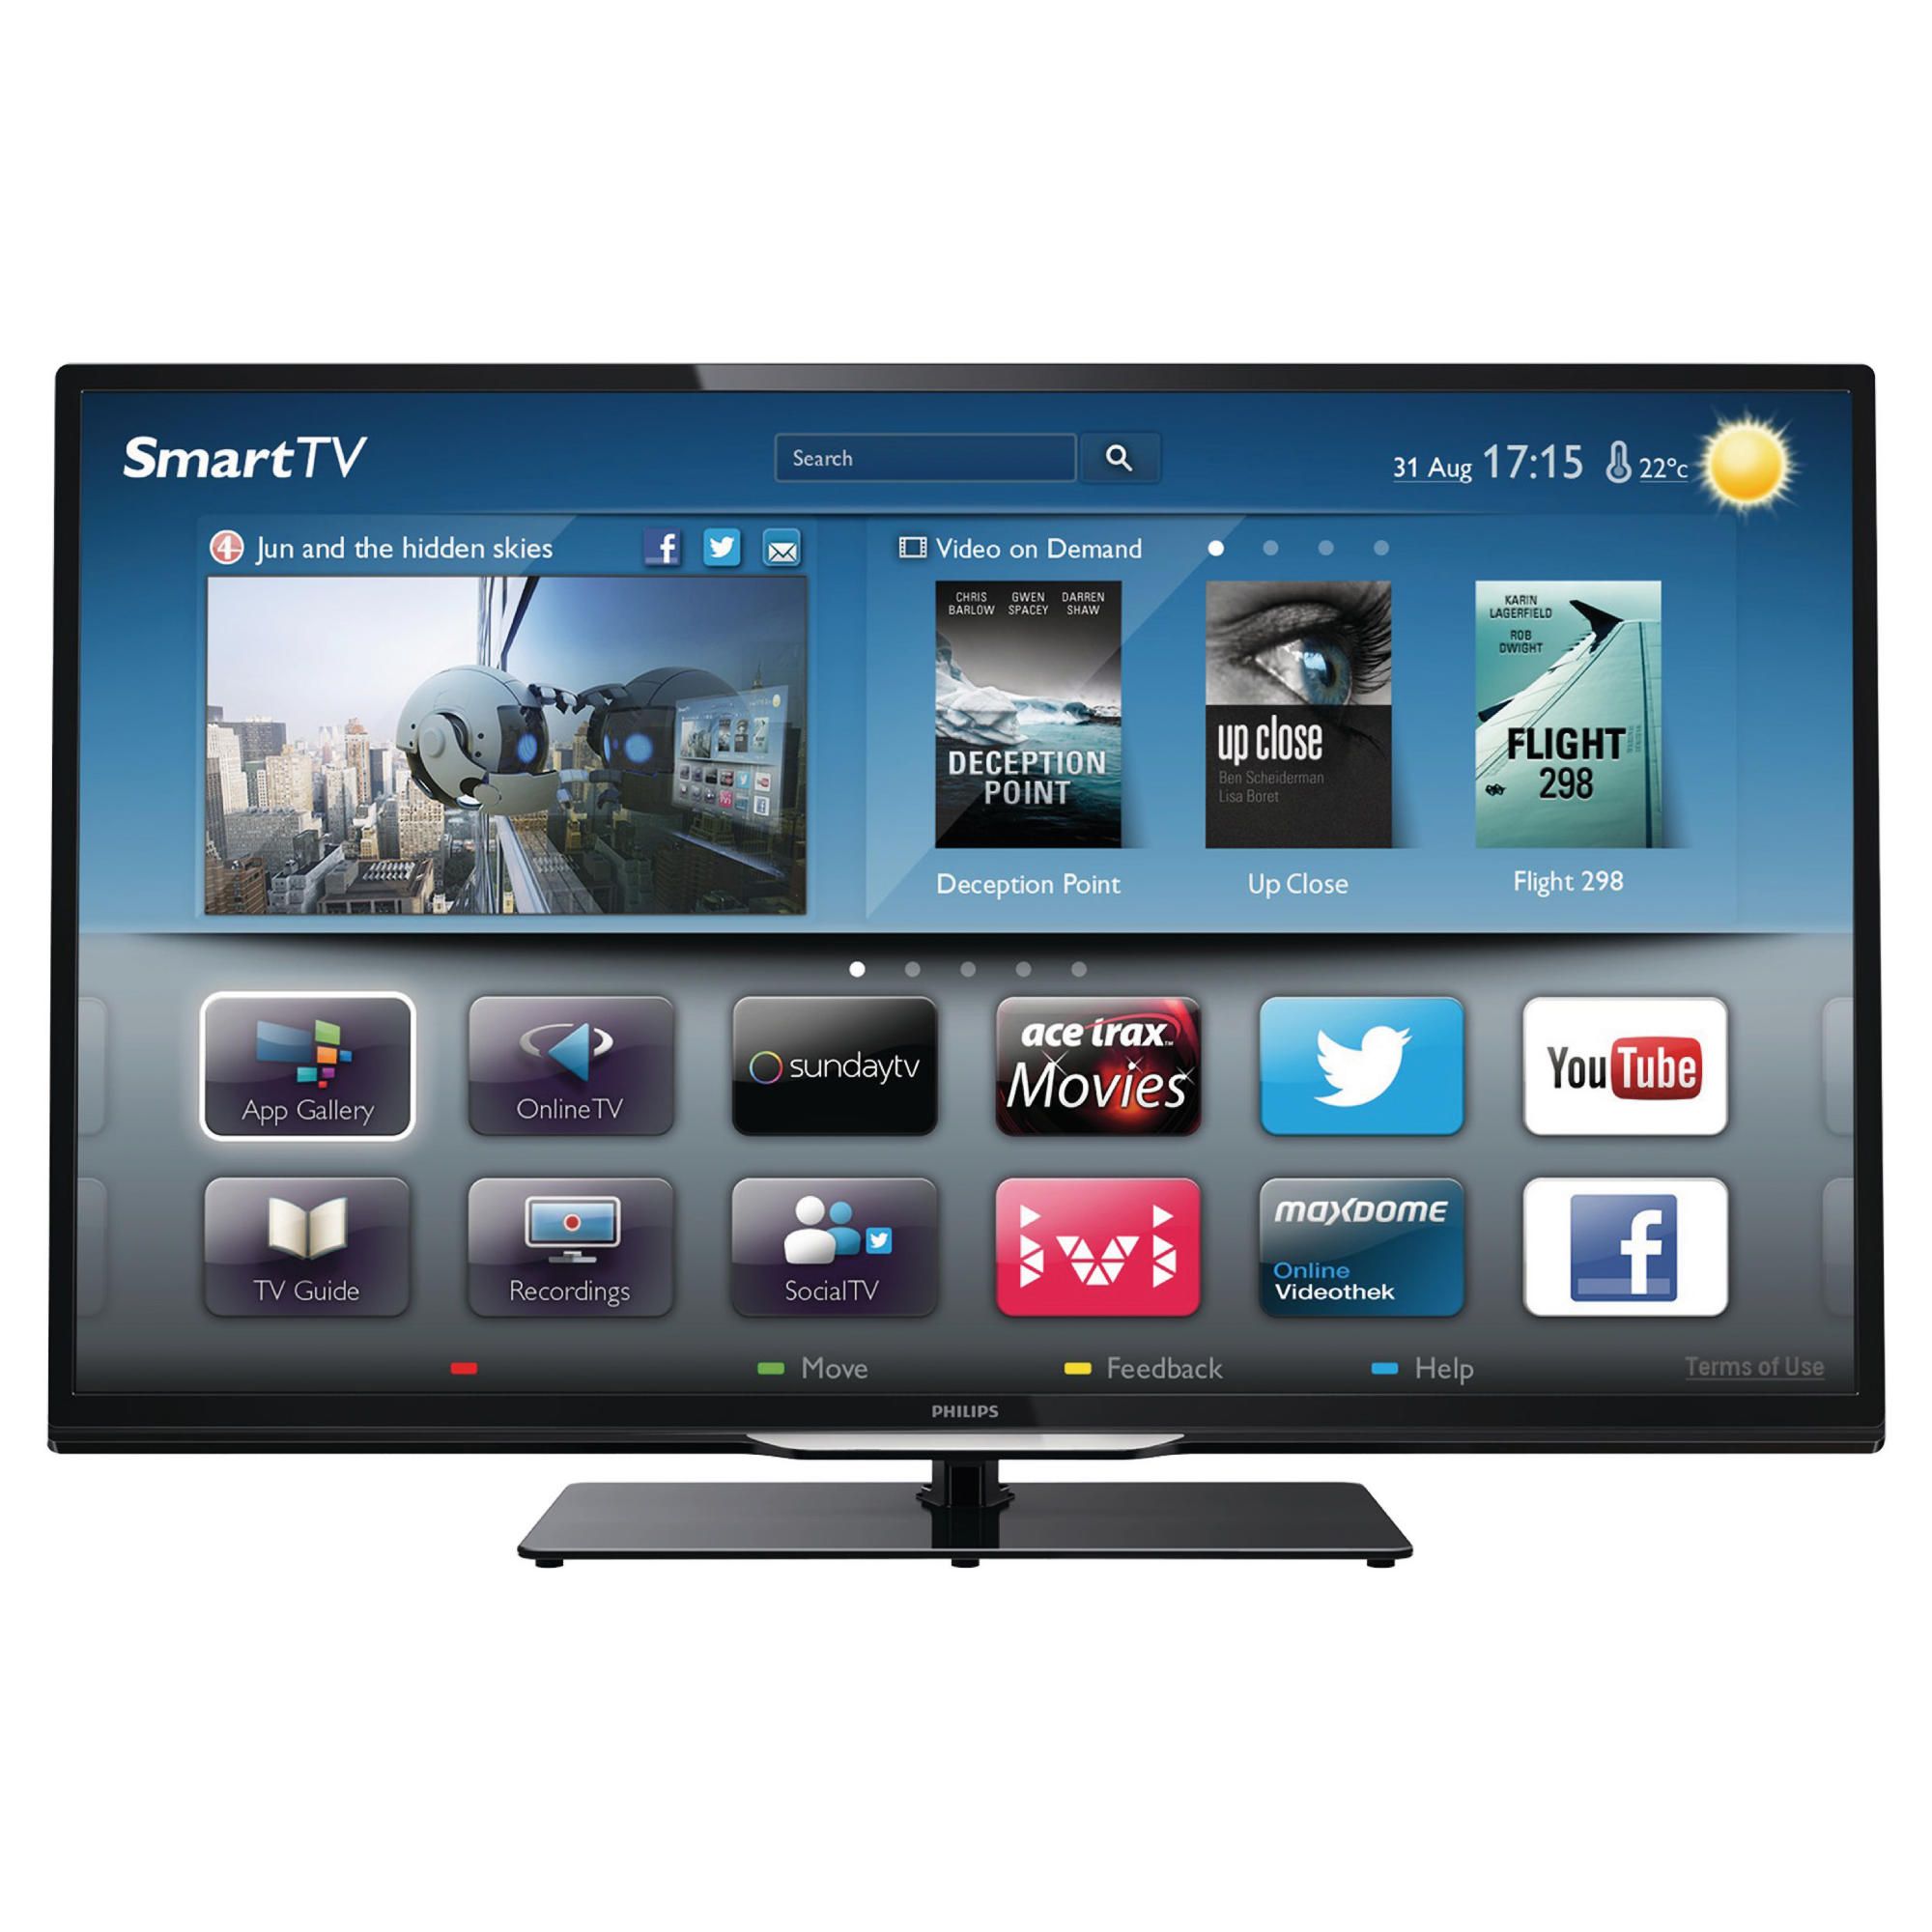 Philips 32PFL4208T 32 inch Full HD 1080p Smart LED TV with Freeview HD